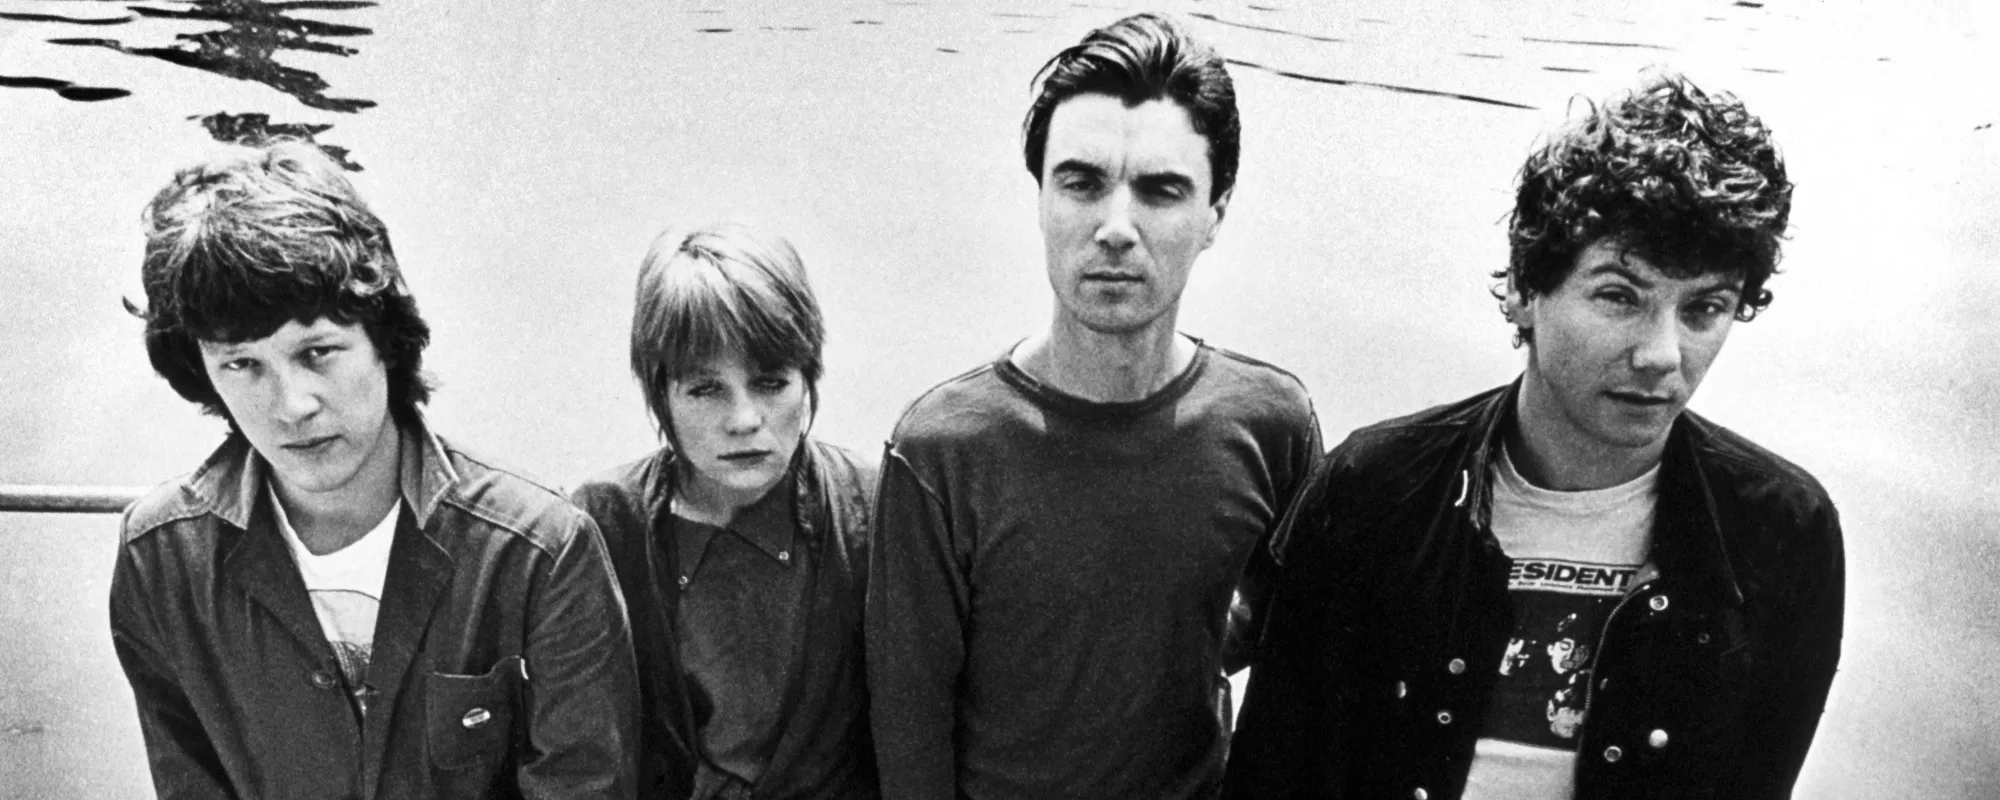 Meaning Behind “Psycho Killer” by the Talking Heads